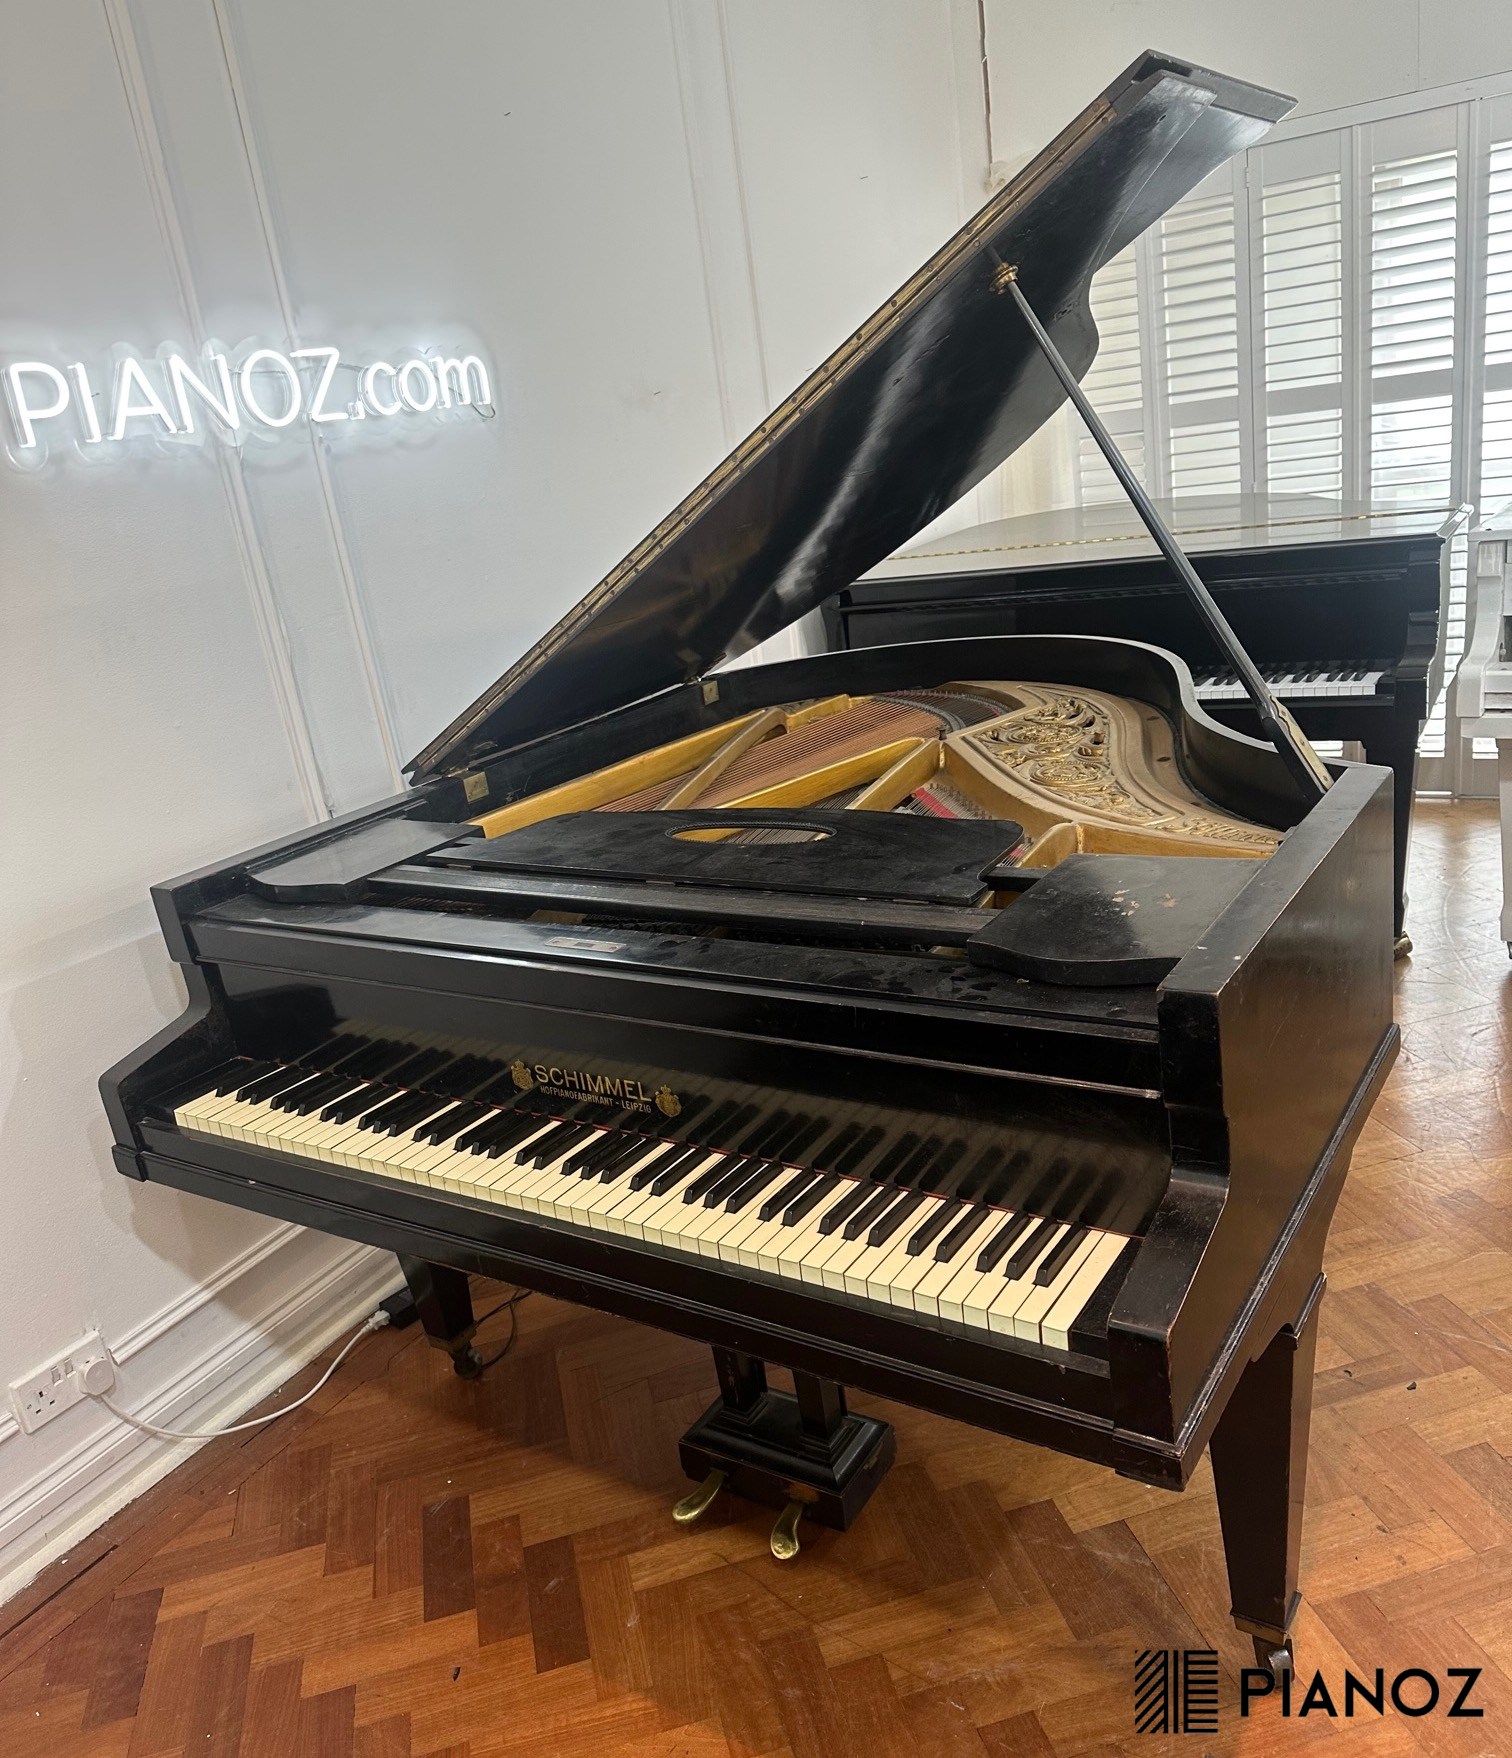 Schimmel Antique Baby Grand Piano piano for sale in UK